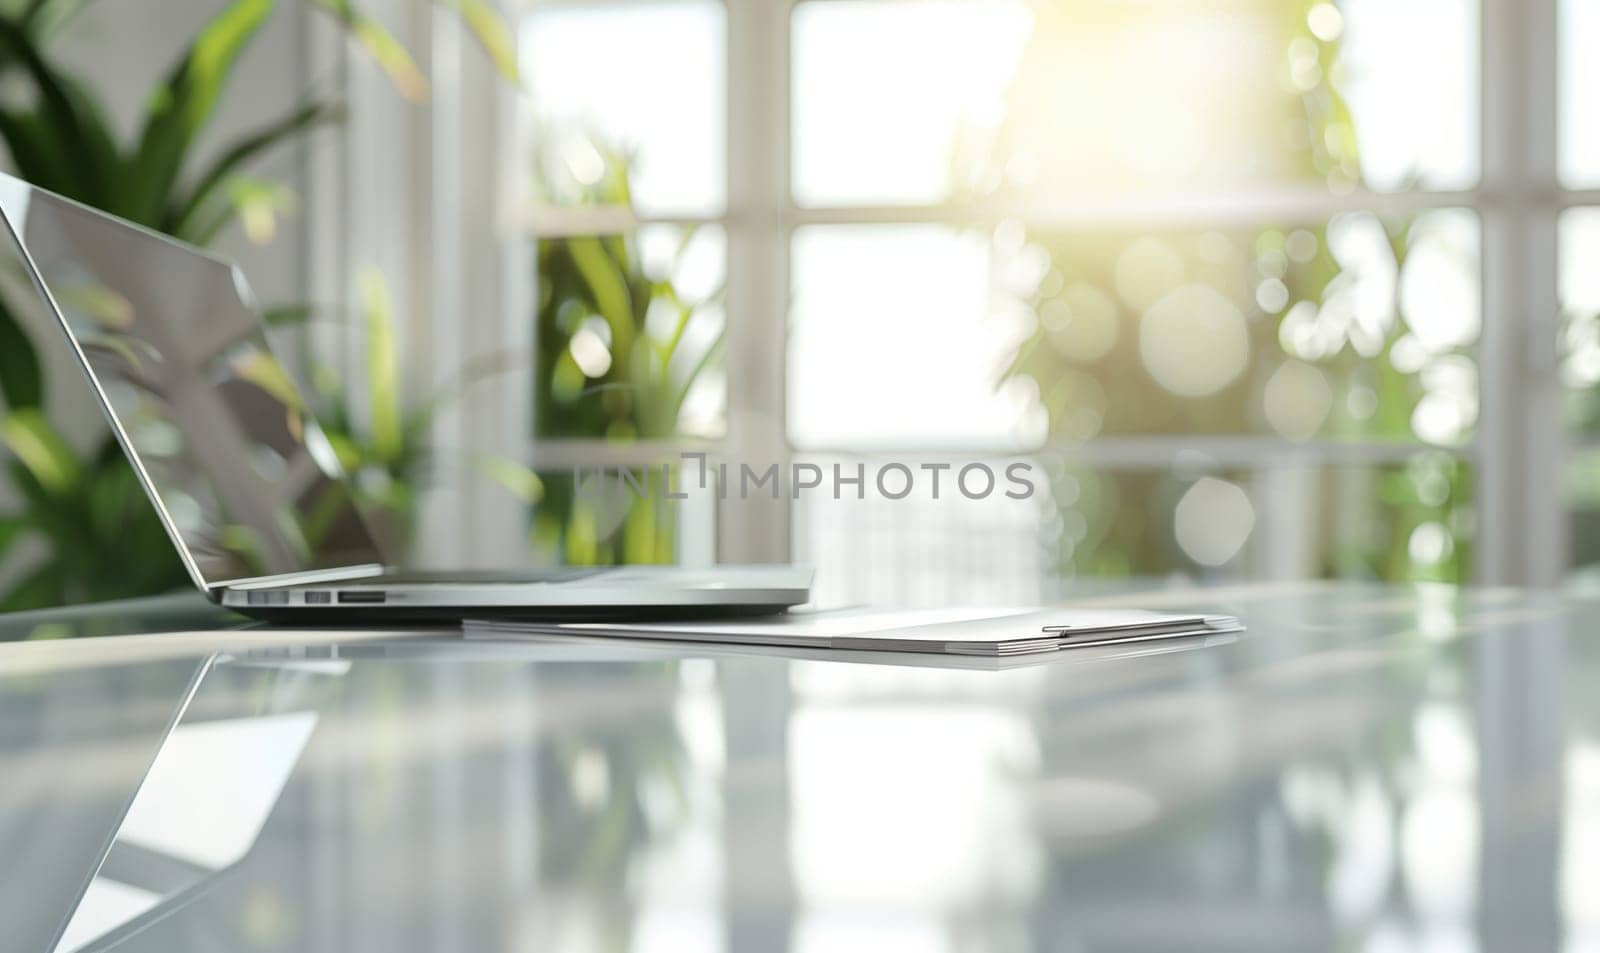 A laptop computer rests on a wooden table near a window, with sunlight streaming in. Outside, a lush green plant sits on the grasscovered ground